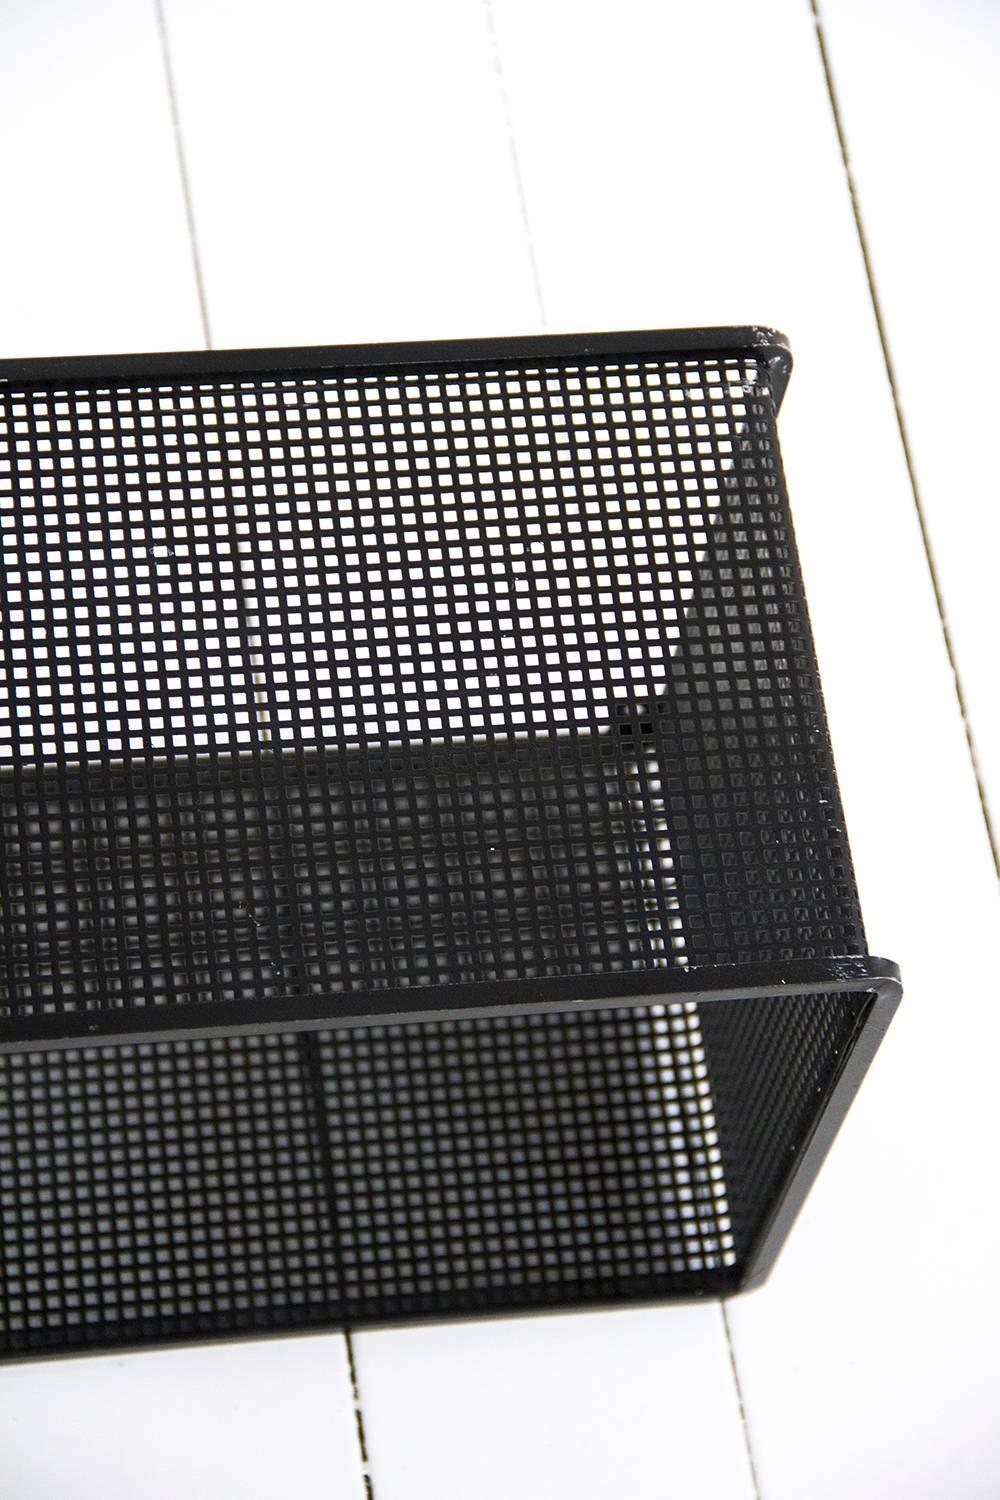 French Black Dedal Wall Shelf by Mathieu Mategot, Perforated Steel, circa 1950, France For Sale